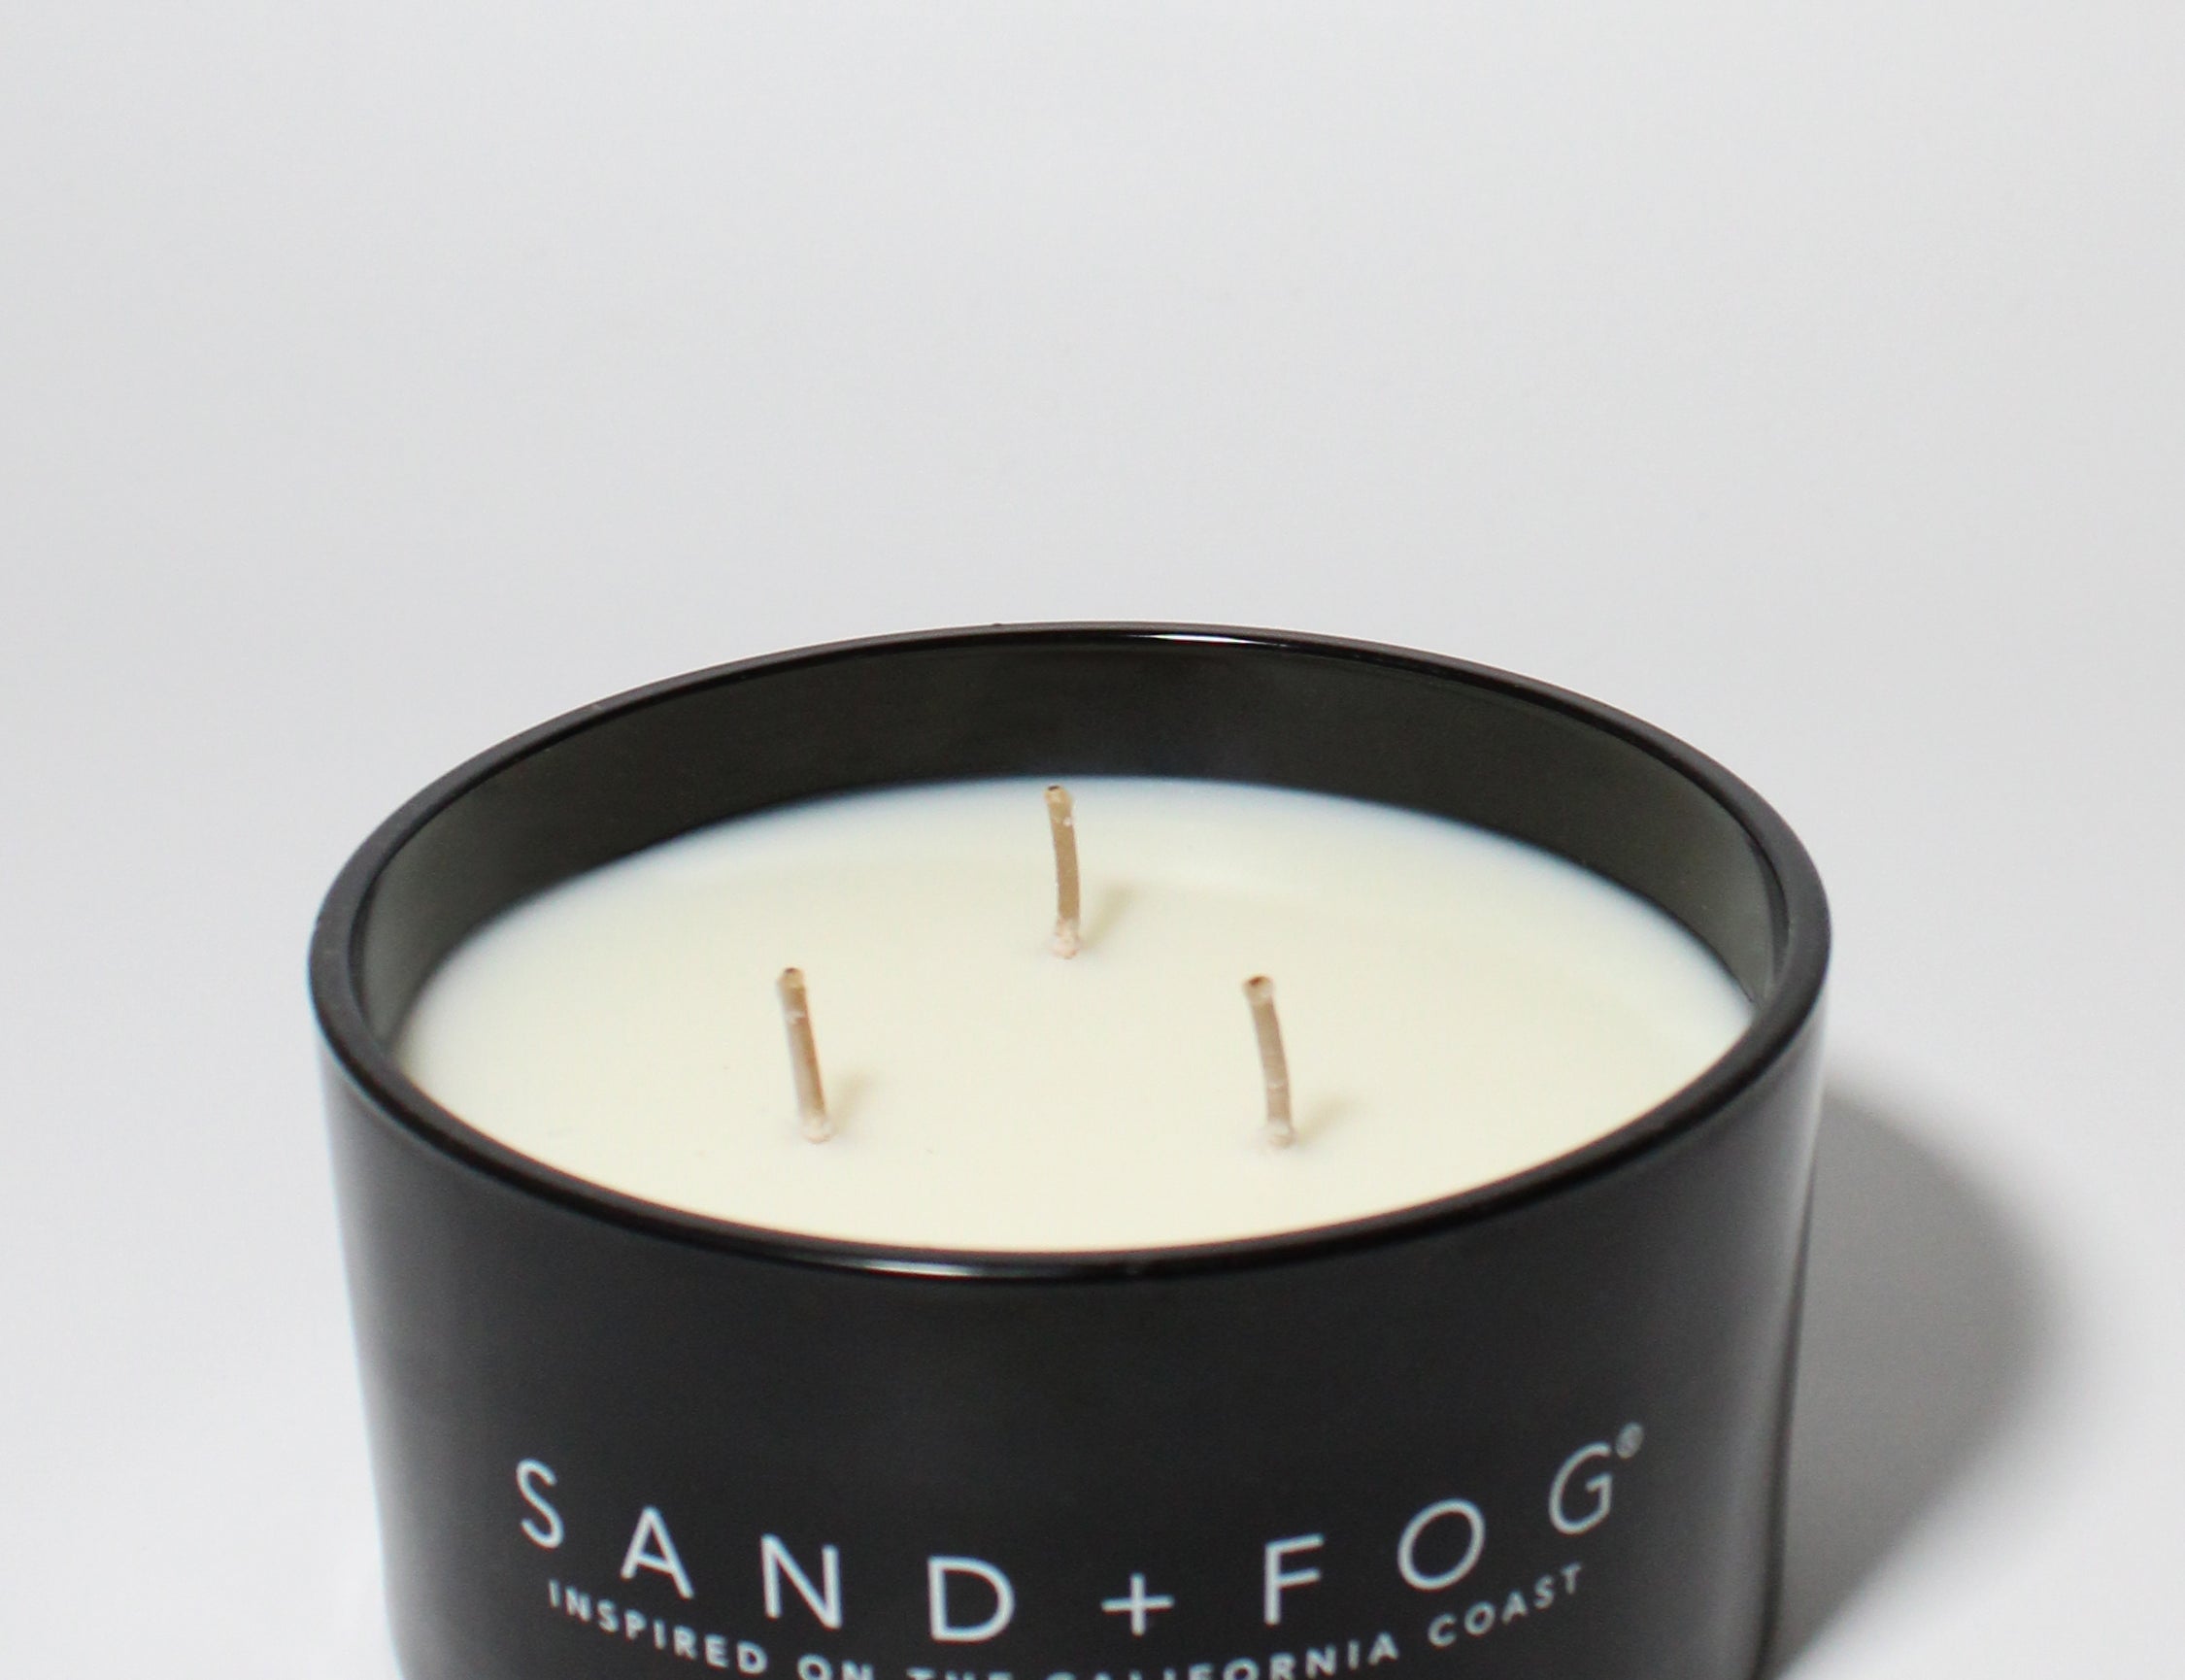 Tahitian Vanilla 10 oz scented candle Black vessel with Carved S+F lid